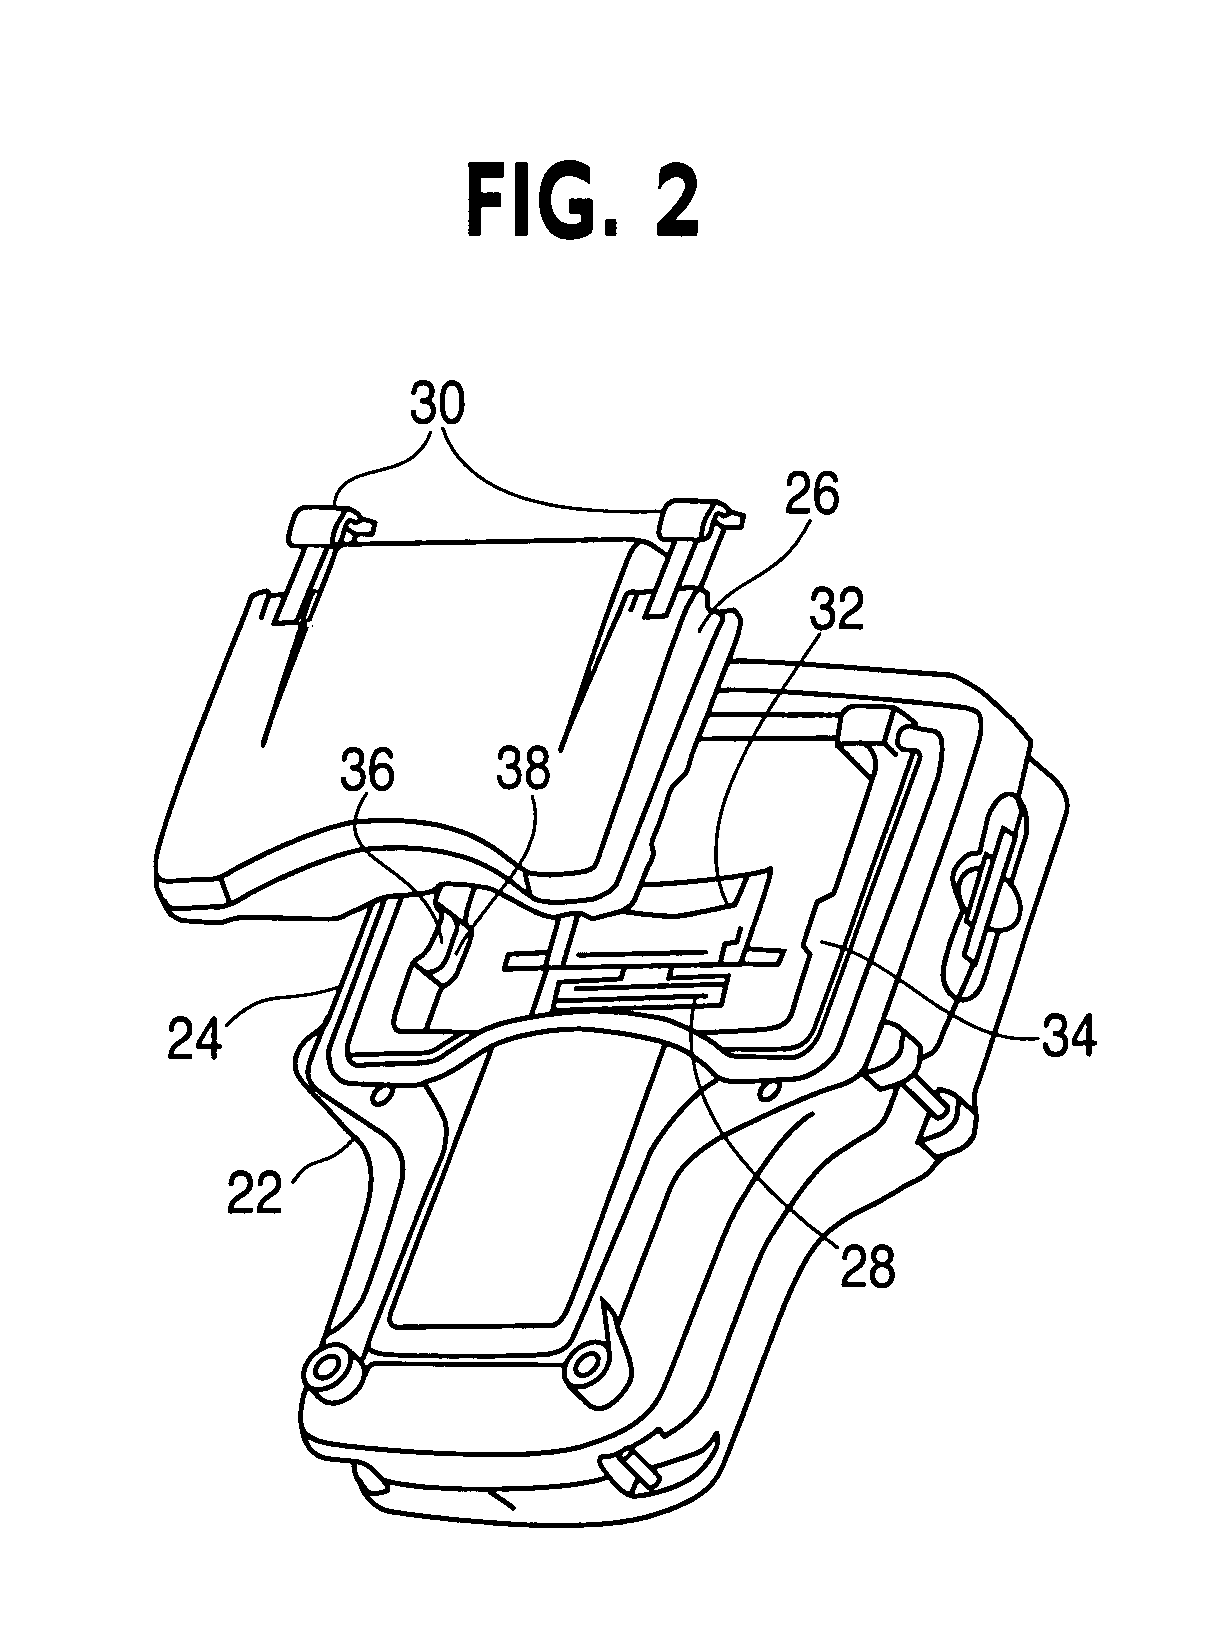 DMM module for portable electronic device